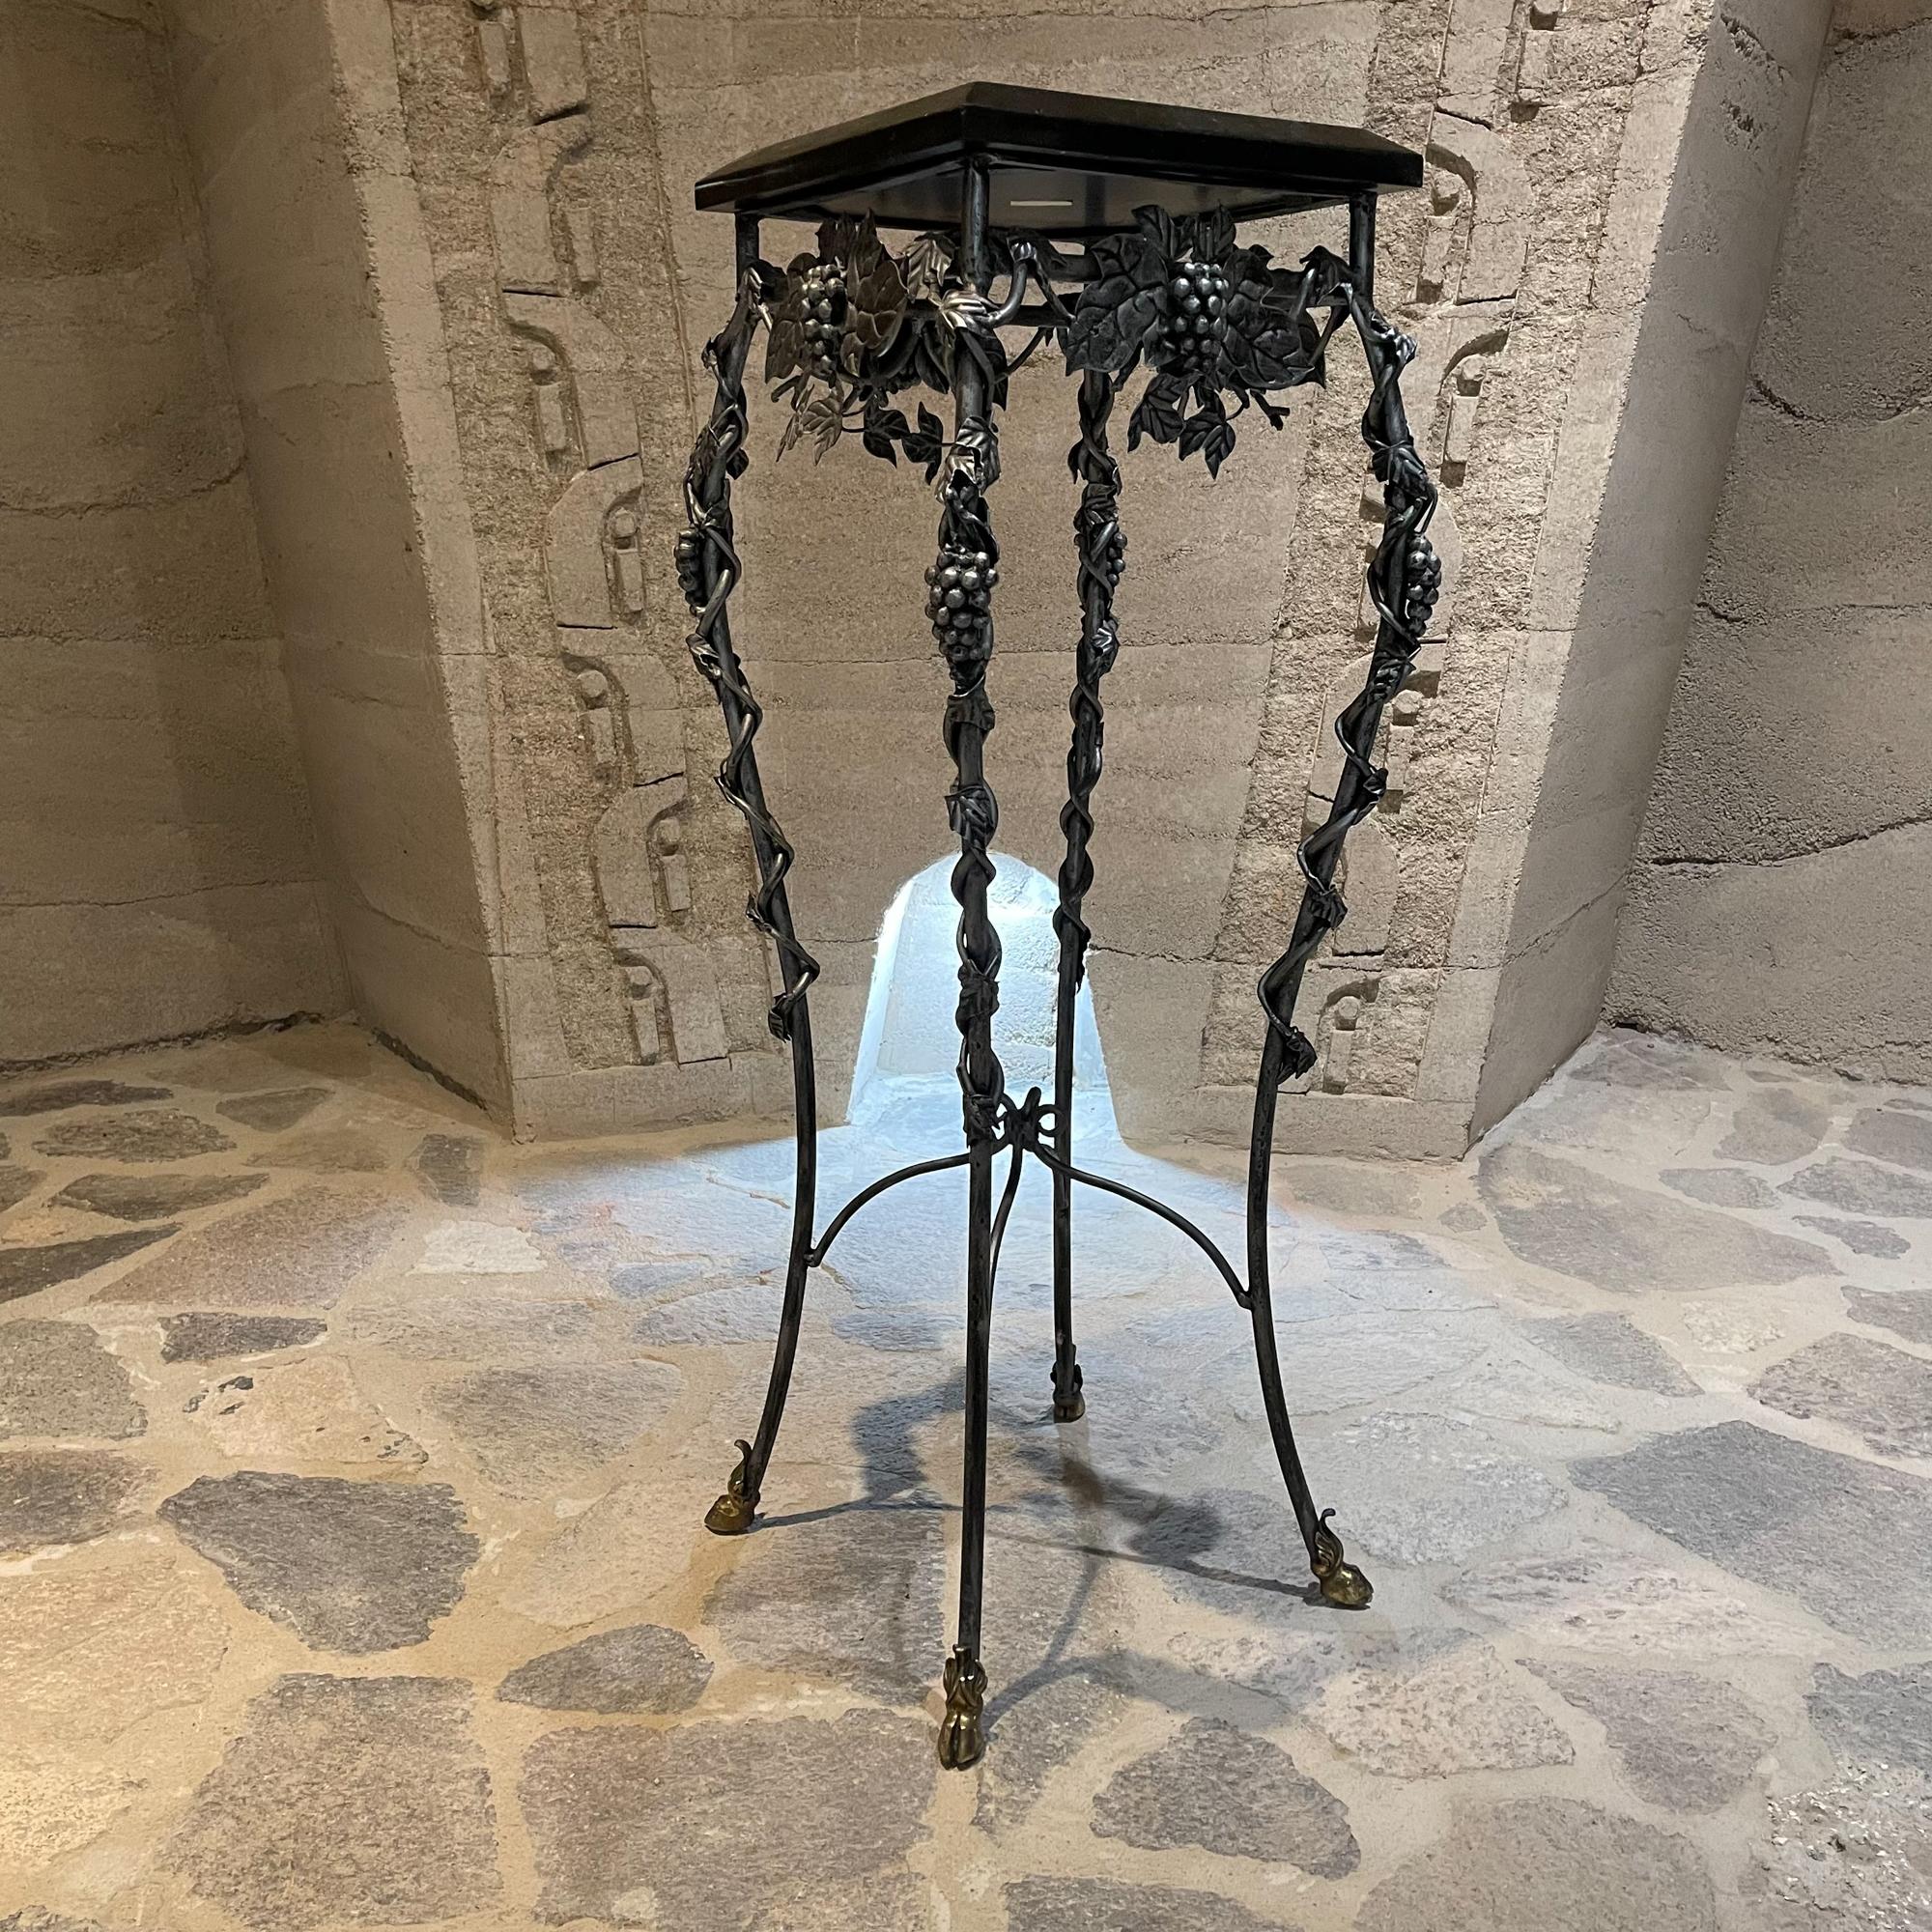 1980s Black Tessellated Stone Iron and Bronze Pedestal Stand or Entry Side Table 
Handmade in the Philippines designed by Maitland Smith LTD
Ideal to showcase sculpture.
Feet are accented with Bronze Sabots.
Maker label present.
42 H x 16 x 16